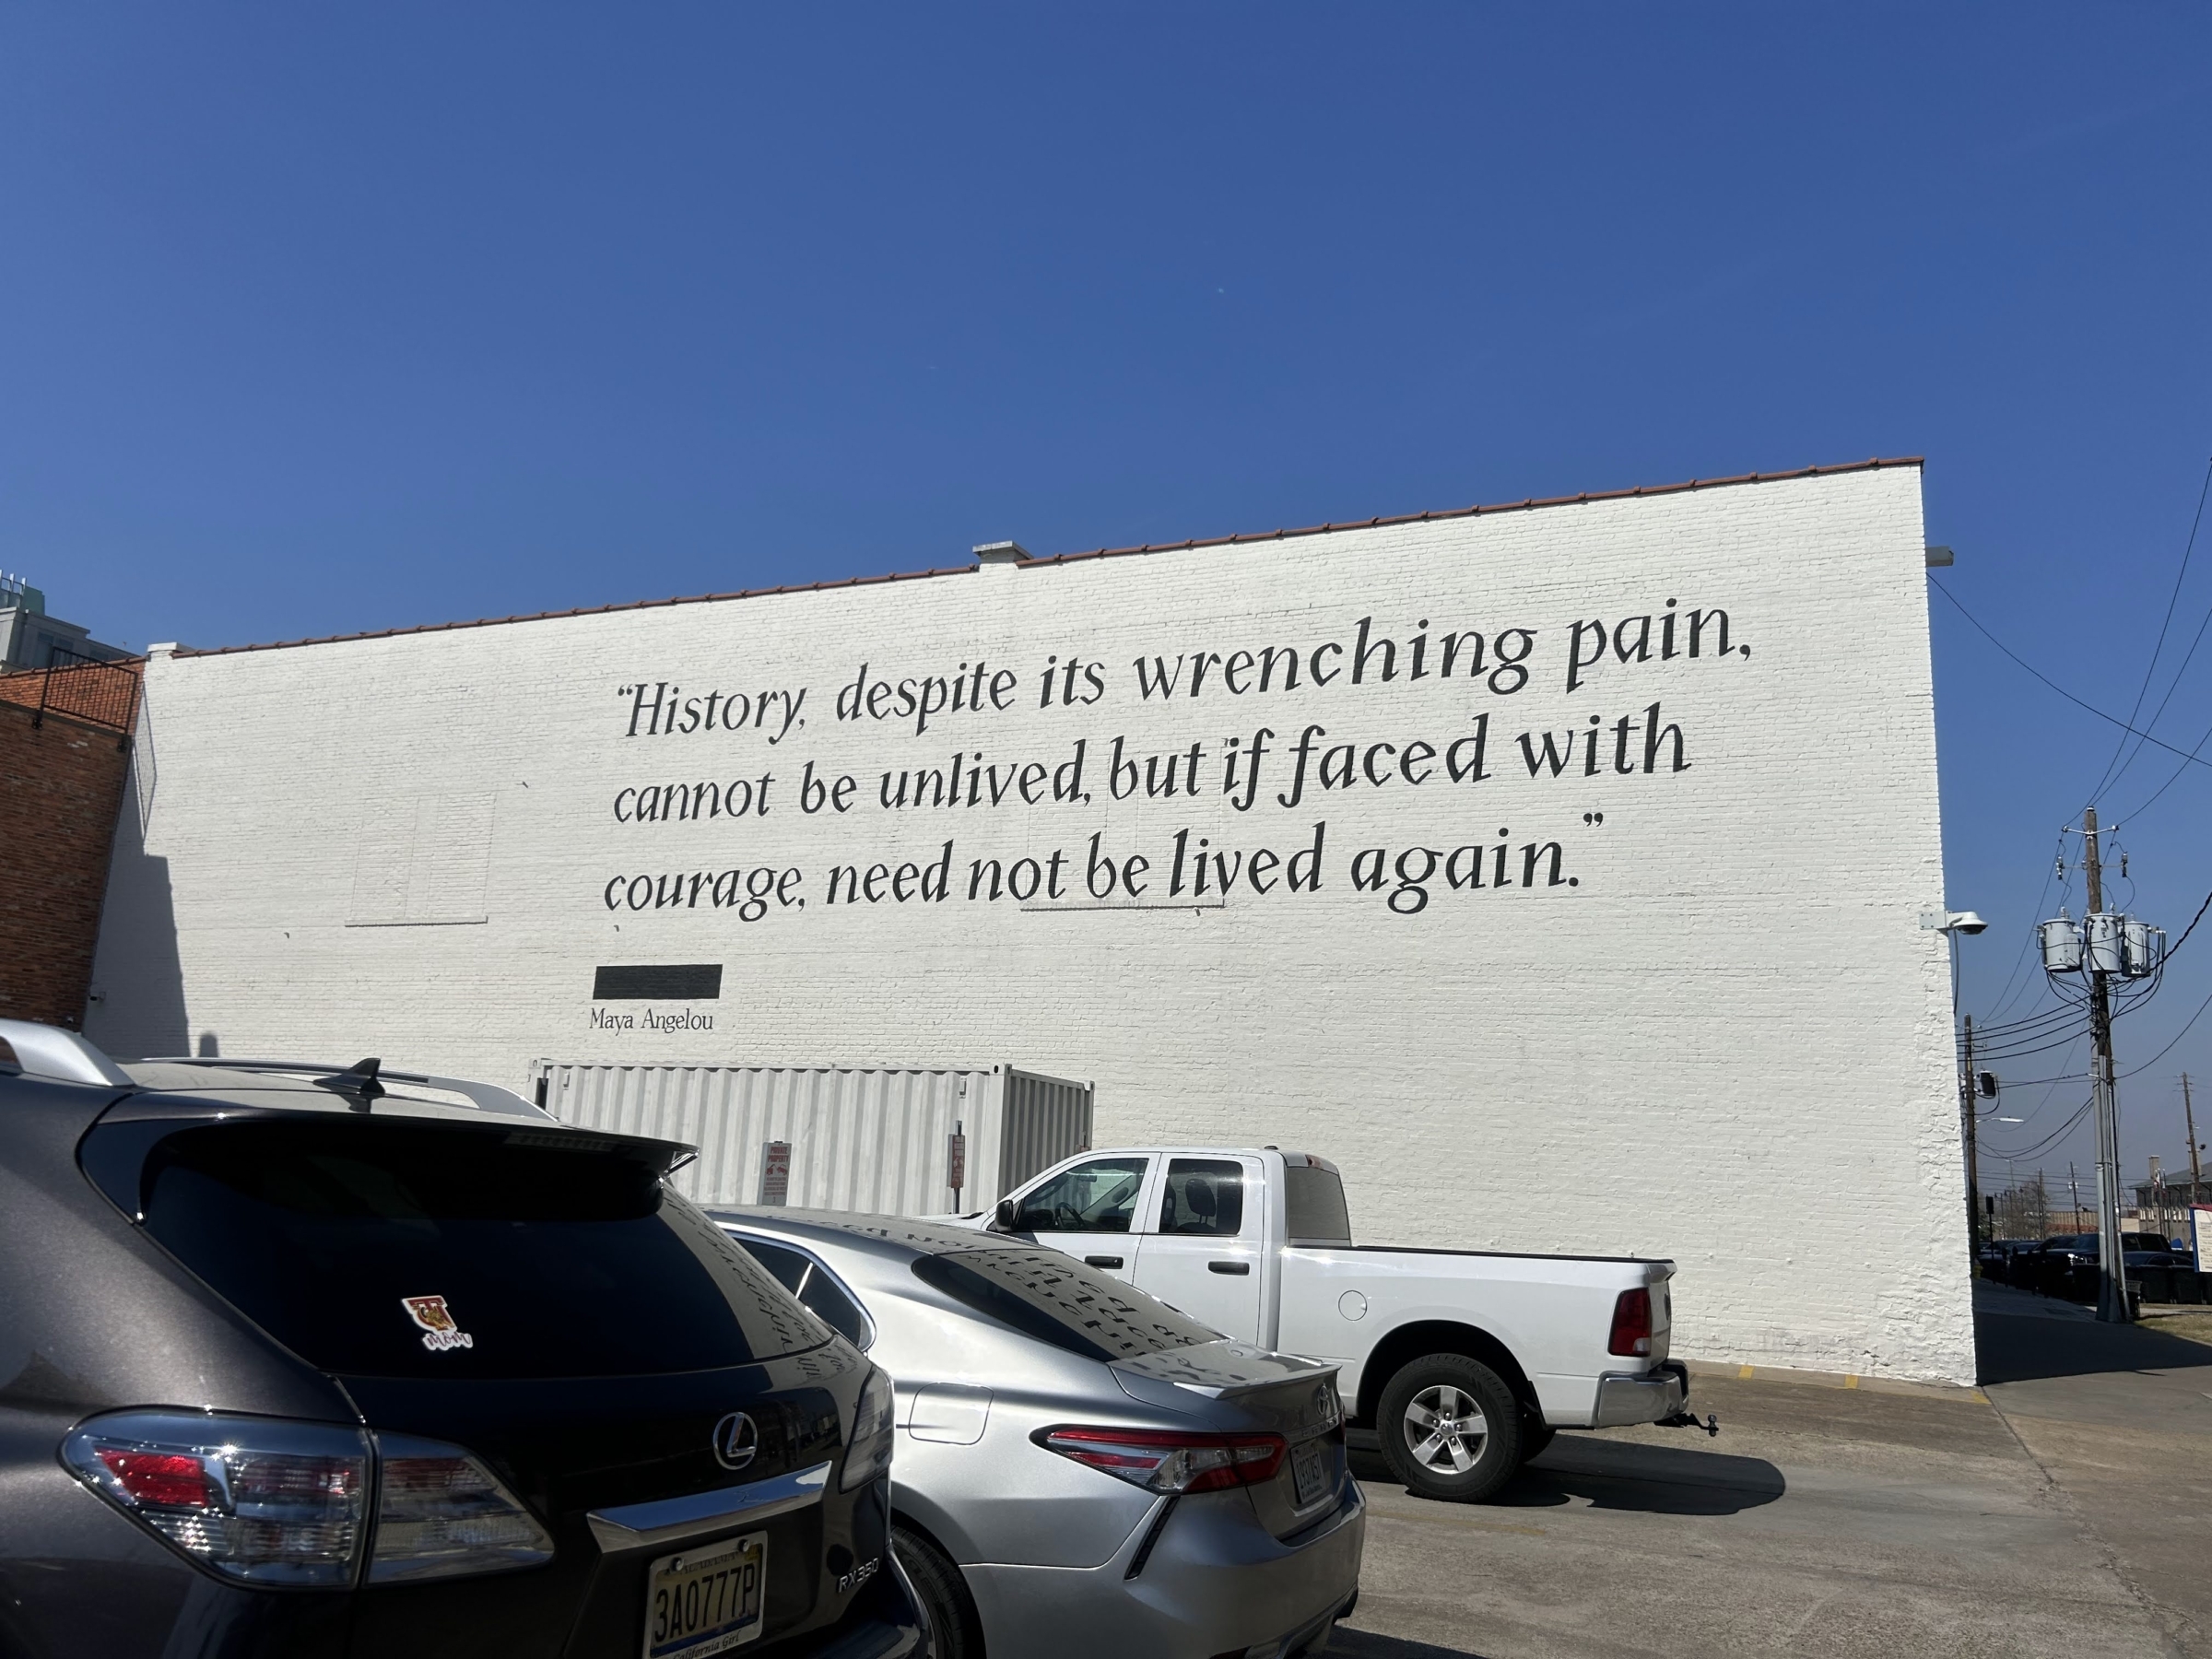 A quote by Maya Angelo on a large white building reads, "history, despite its wrenching pain, cannot be unlived, but if faced with courage, need not be lived again"